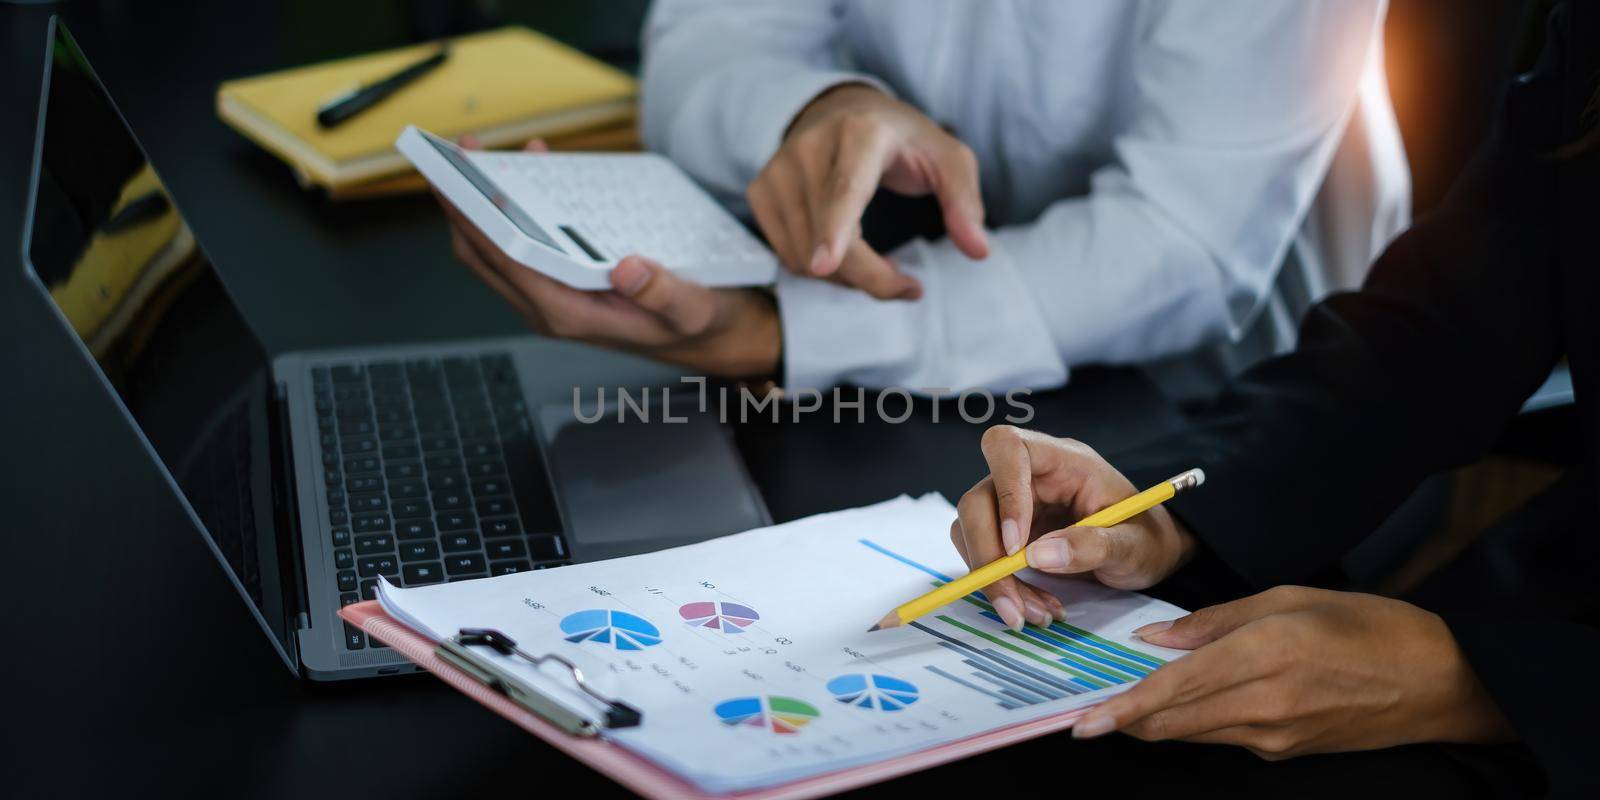 Group of Businesswoman and Accountant checking data document on digital tablet for investigation of corruption account . Anti Bribery concept. by itchaznong